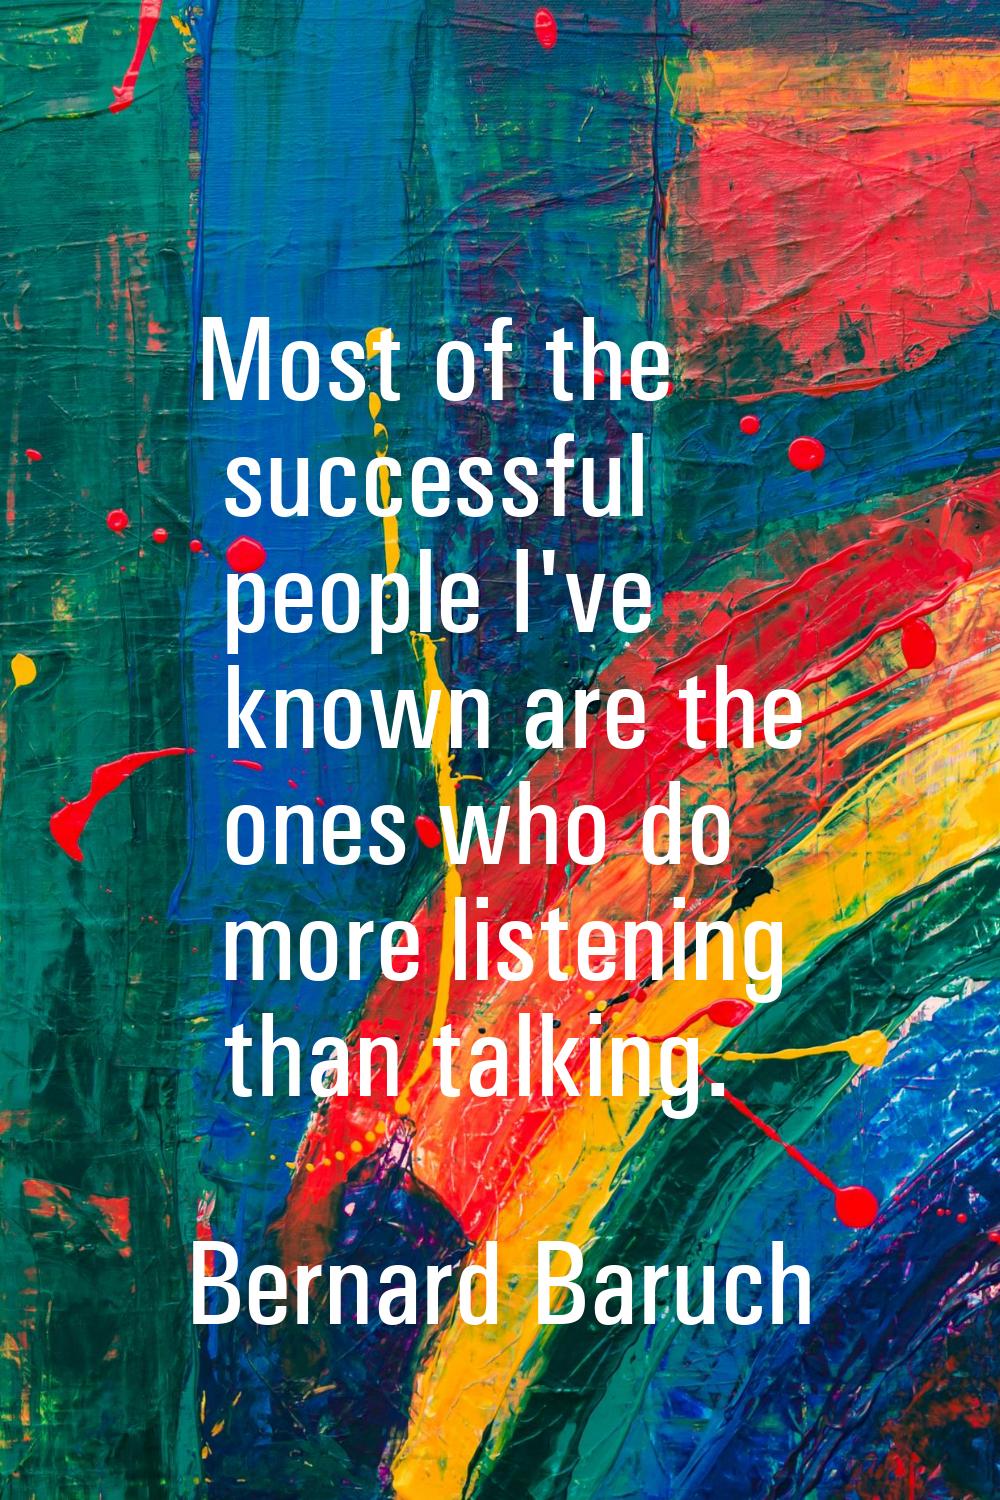 Most of the successful people I've known are the ones who do more listening than talking.